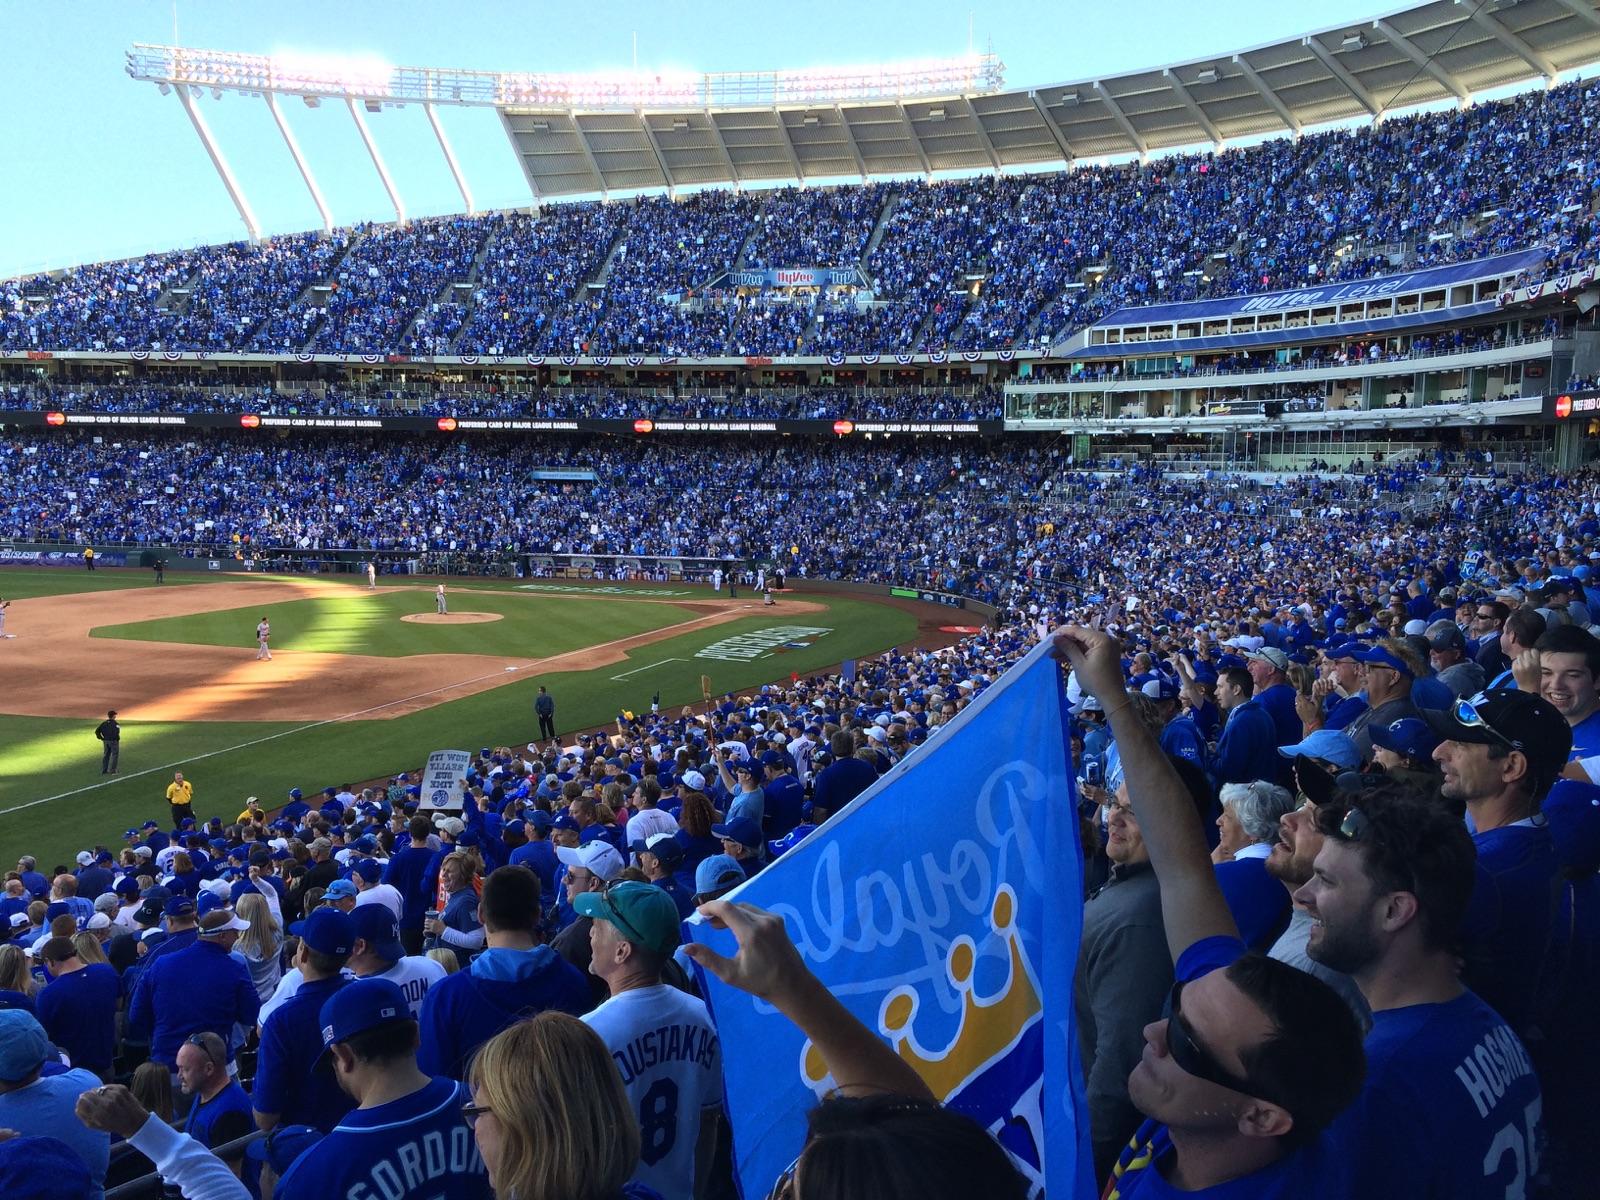  the Kansas City Royals clinched the American League championship to go